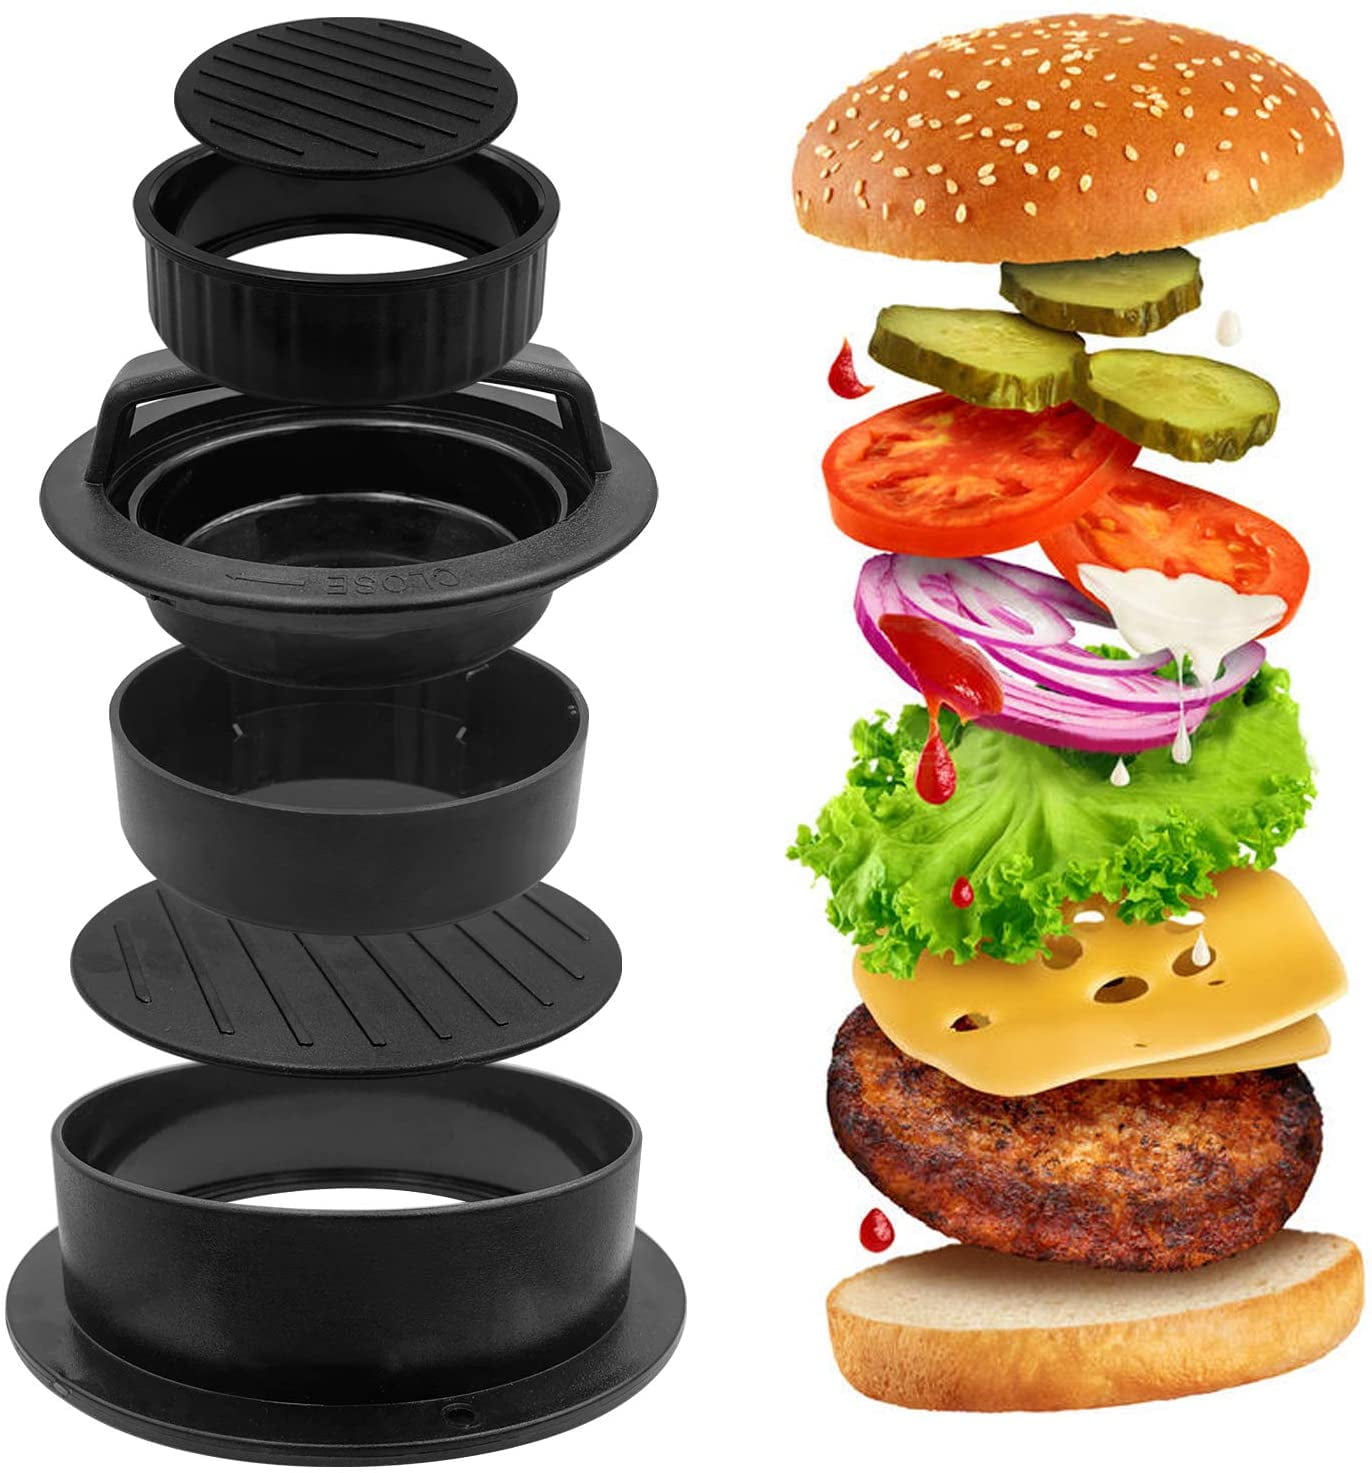 Black Dinner The Burger Mate Non-Stick As Seen On TV Burger Press Hamburger Patty Maker for BBQ Grill and More Parties 